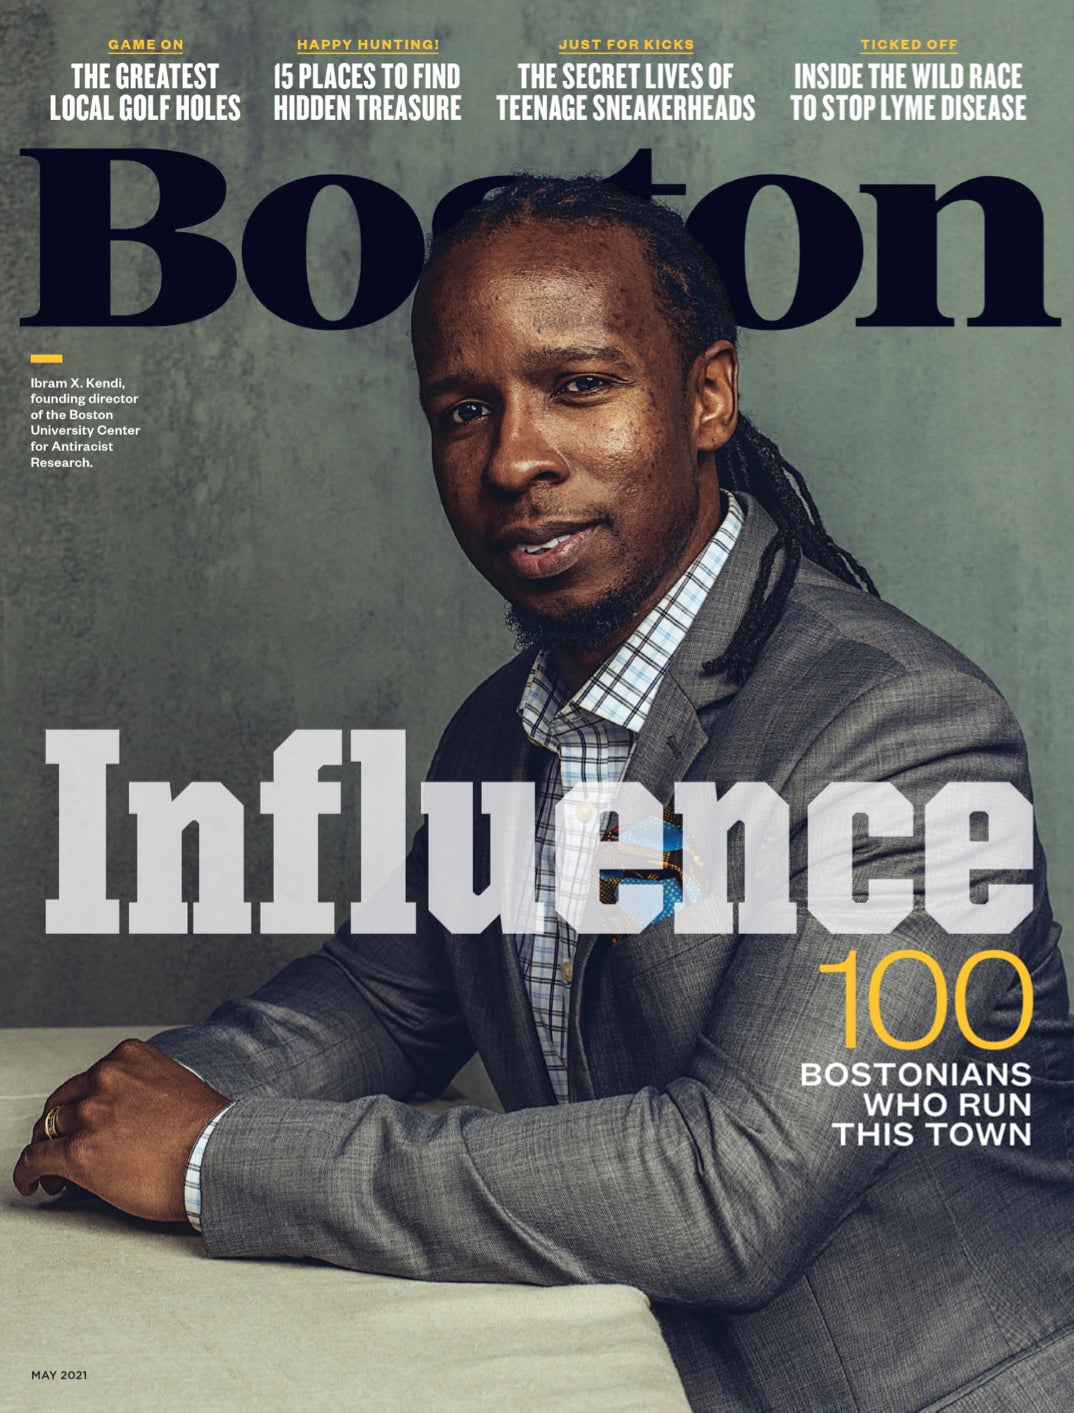 These are the most powerful people in Boston, according to Boston Magazine